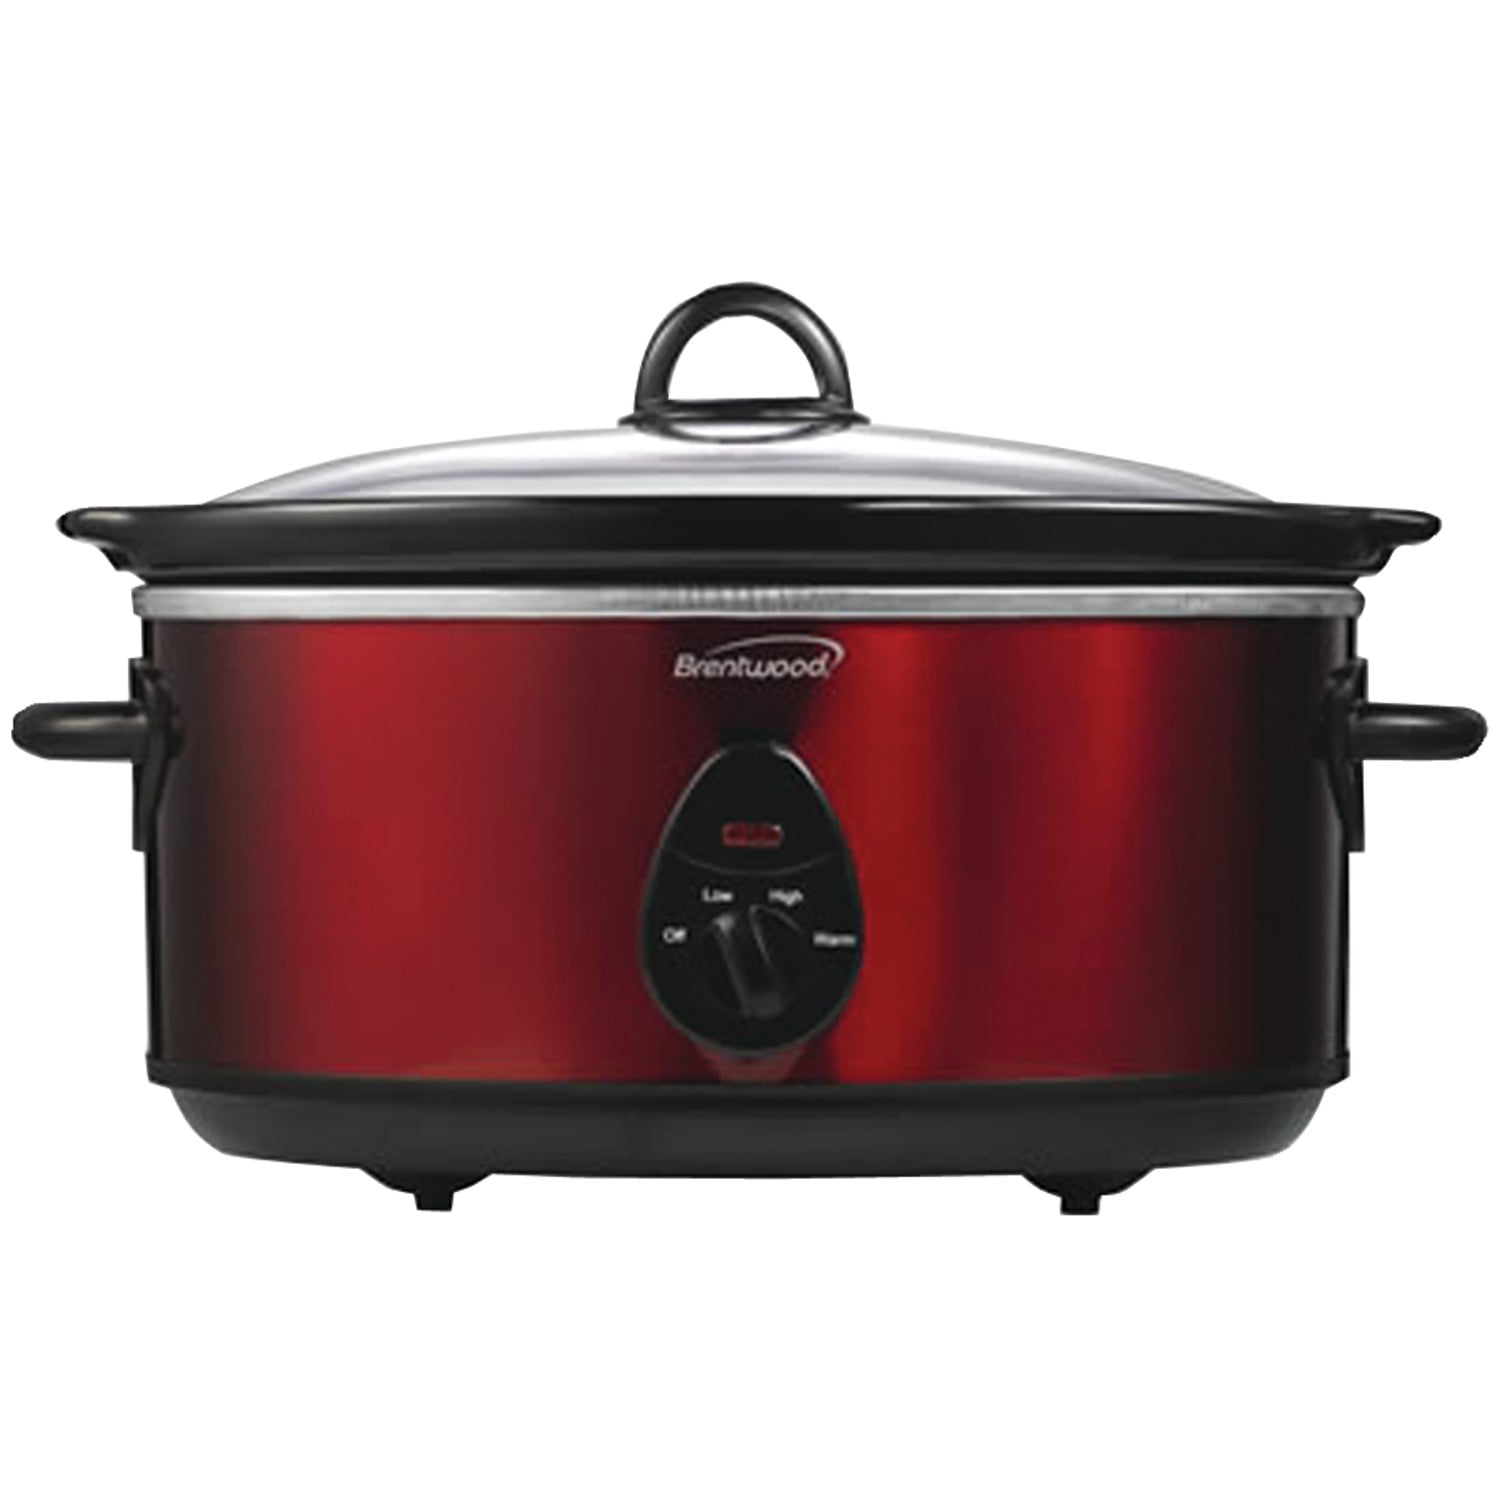 Brentwood Select SC-157R 7 Quart Slow Cooker, Red - Brentwood